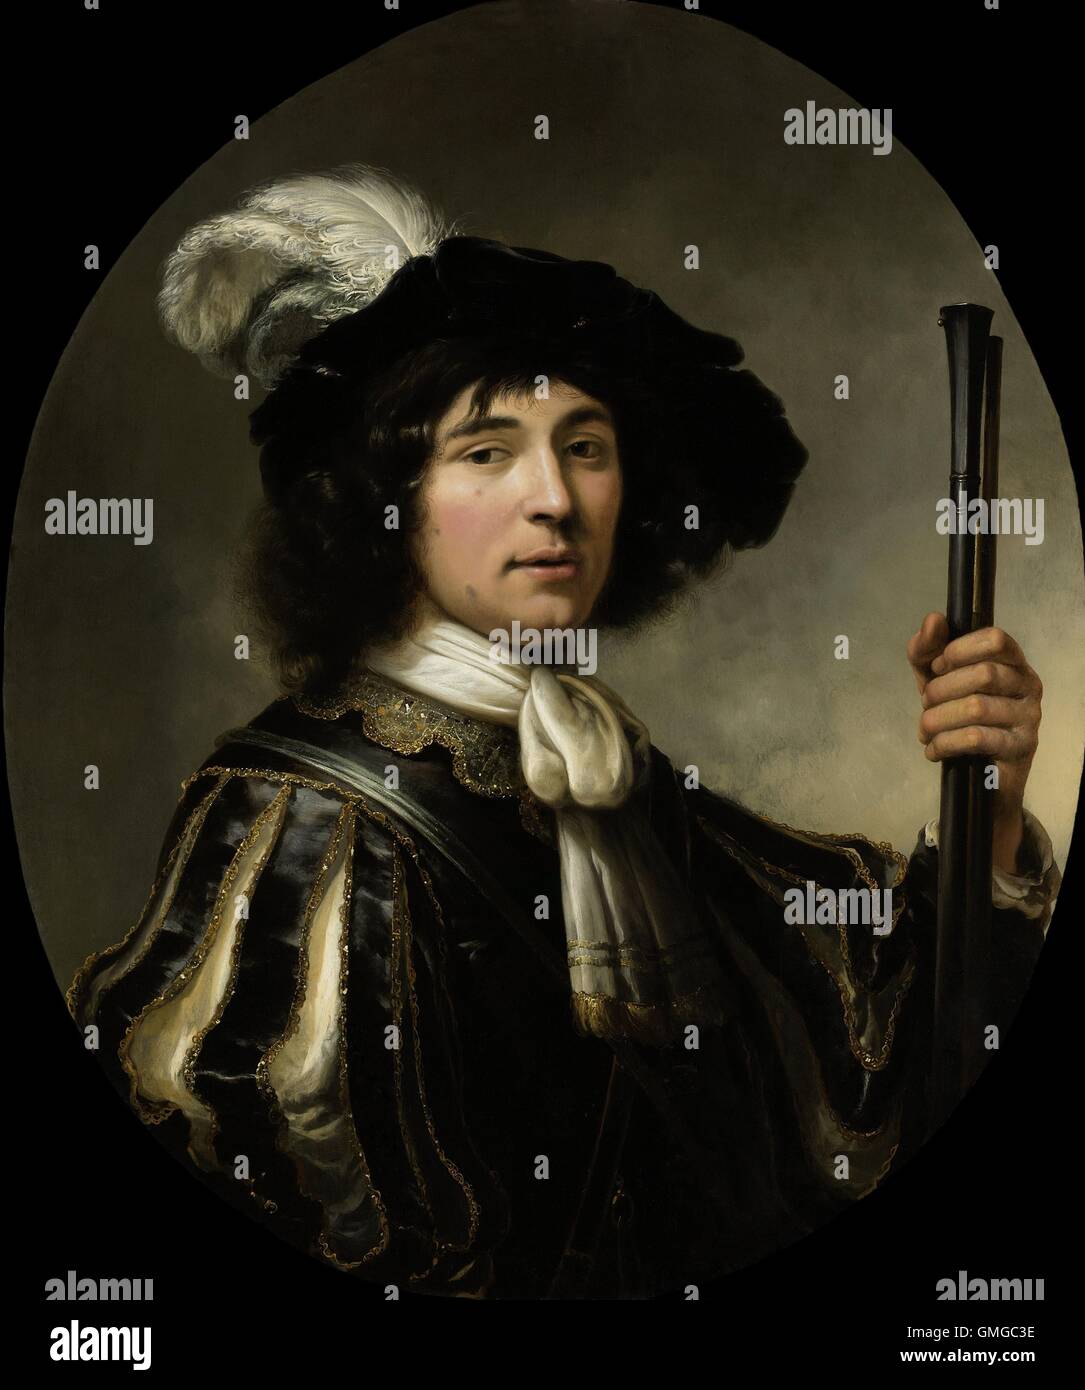 Portrait of a Young Man, by Aelbert Cuyp, 1640-60, Dutch painting, oil on panel. Gentleman wears a feathered beret, ornate jacket with embroidered slashed sleeves, and a jeweled collar. In his left hand he holds the barrel of a gun (BSLOC 2016 3 132) Stock Photo